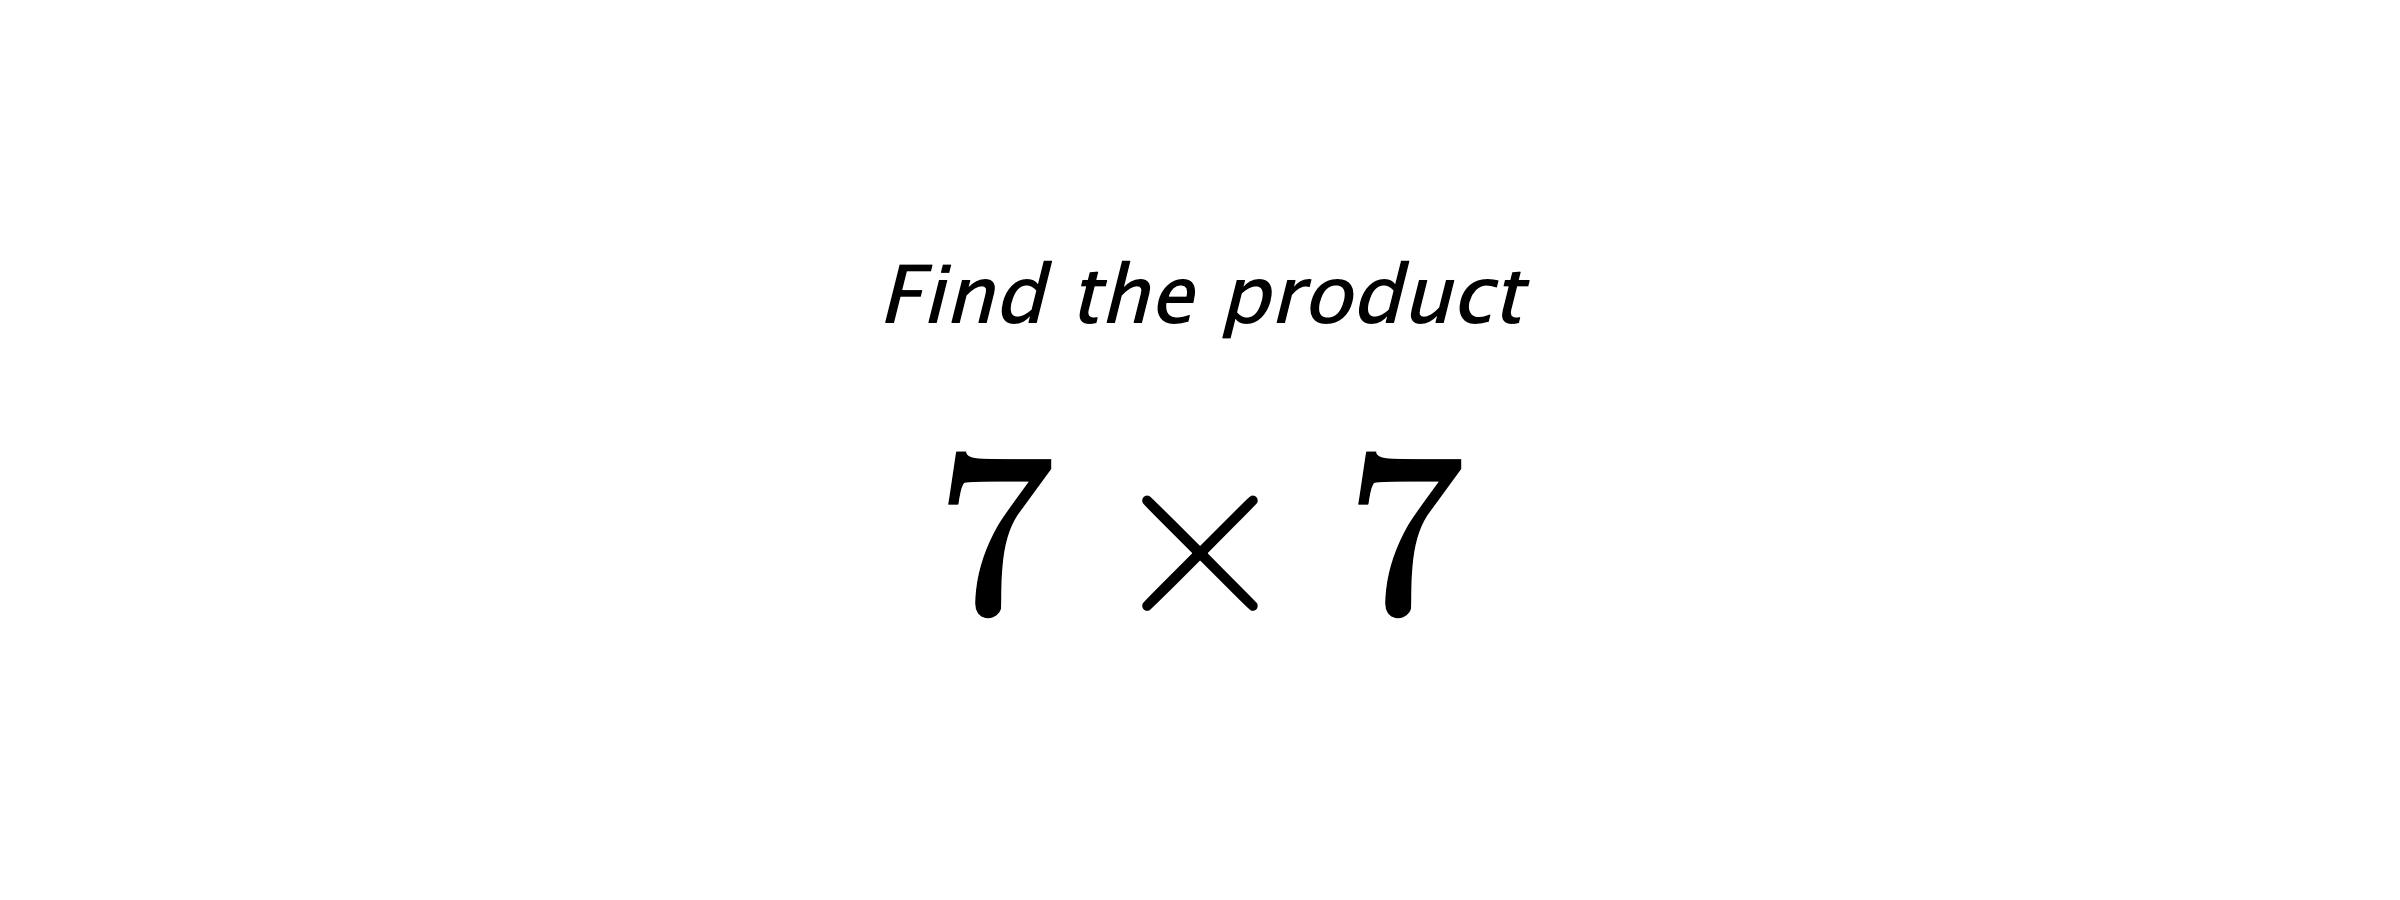 Find the product $ 7 \times 7 $